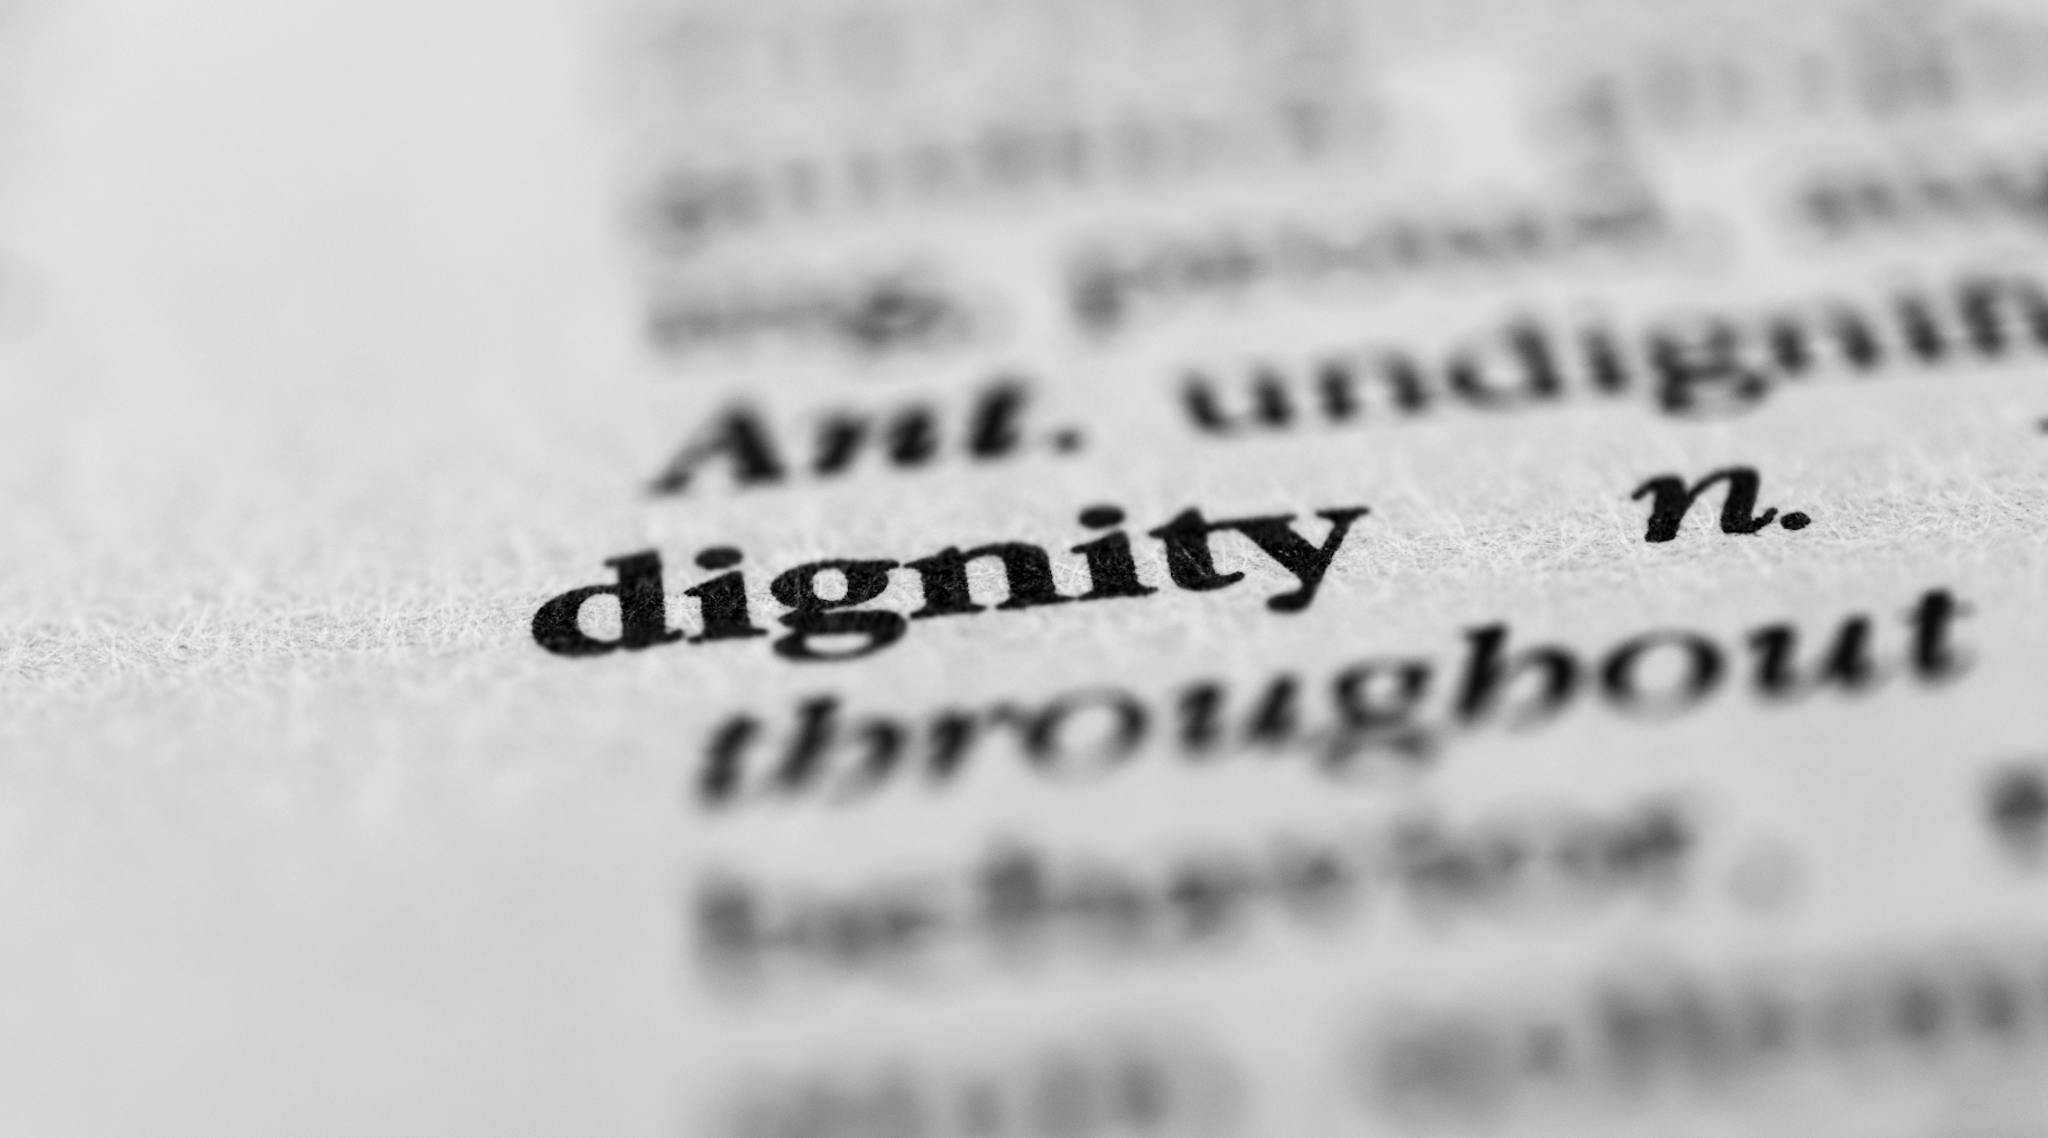 A dictionary page with the definition of dignity in focus